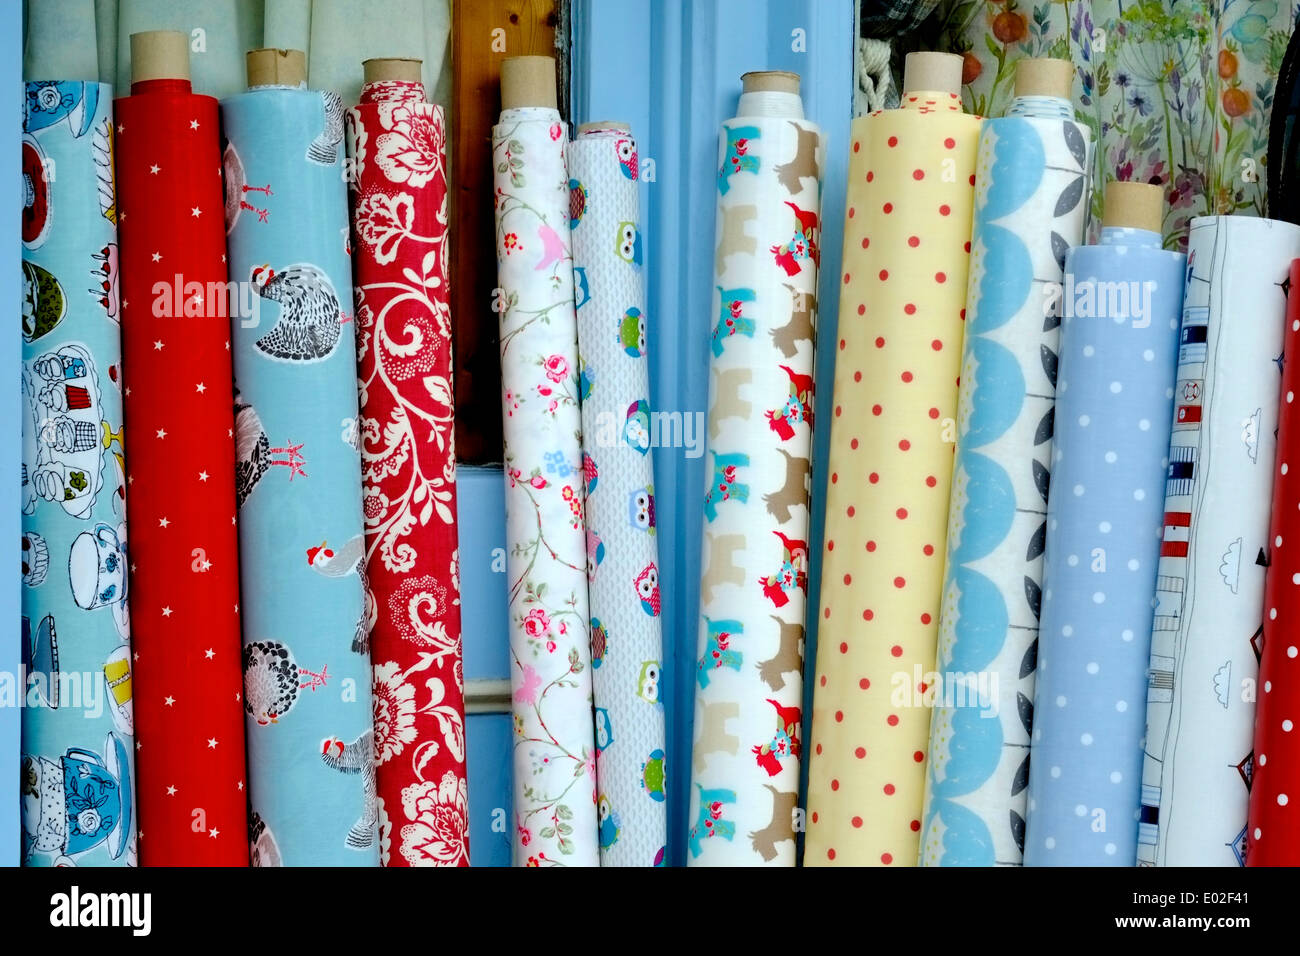 Rolls of colorful fabric outside a shop in Matlock Bath Derbyshire England UK Stock Photo